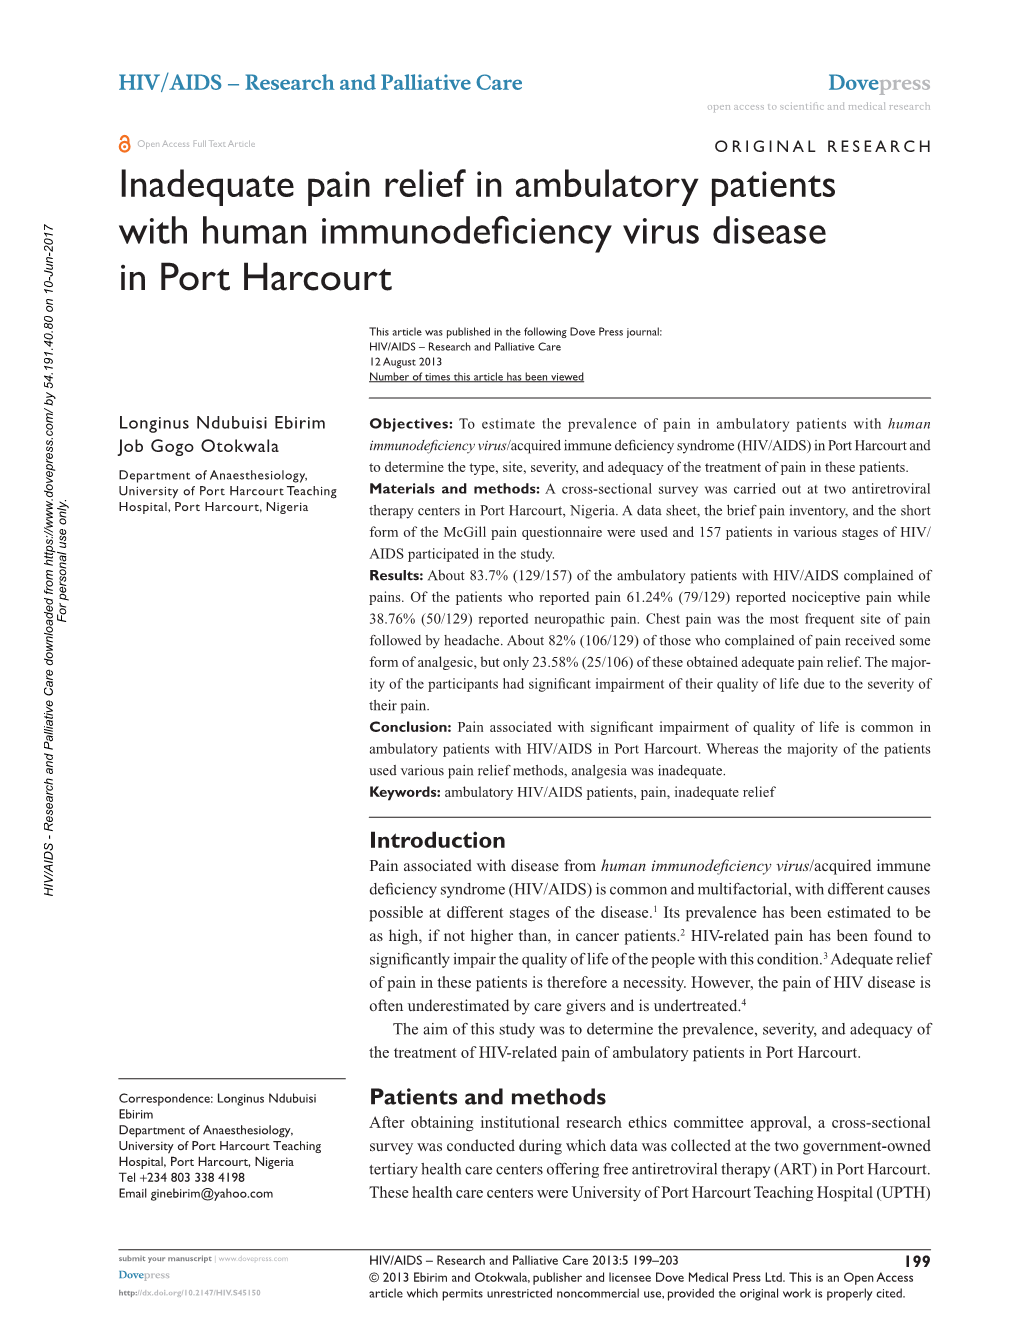 Inadequate Pain Relief in Ambulatory Patients with Human Immunodeficiency Virus Disease in Port Harcourt